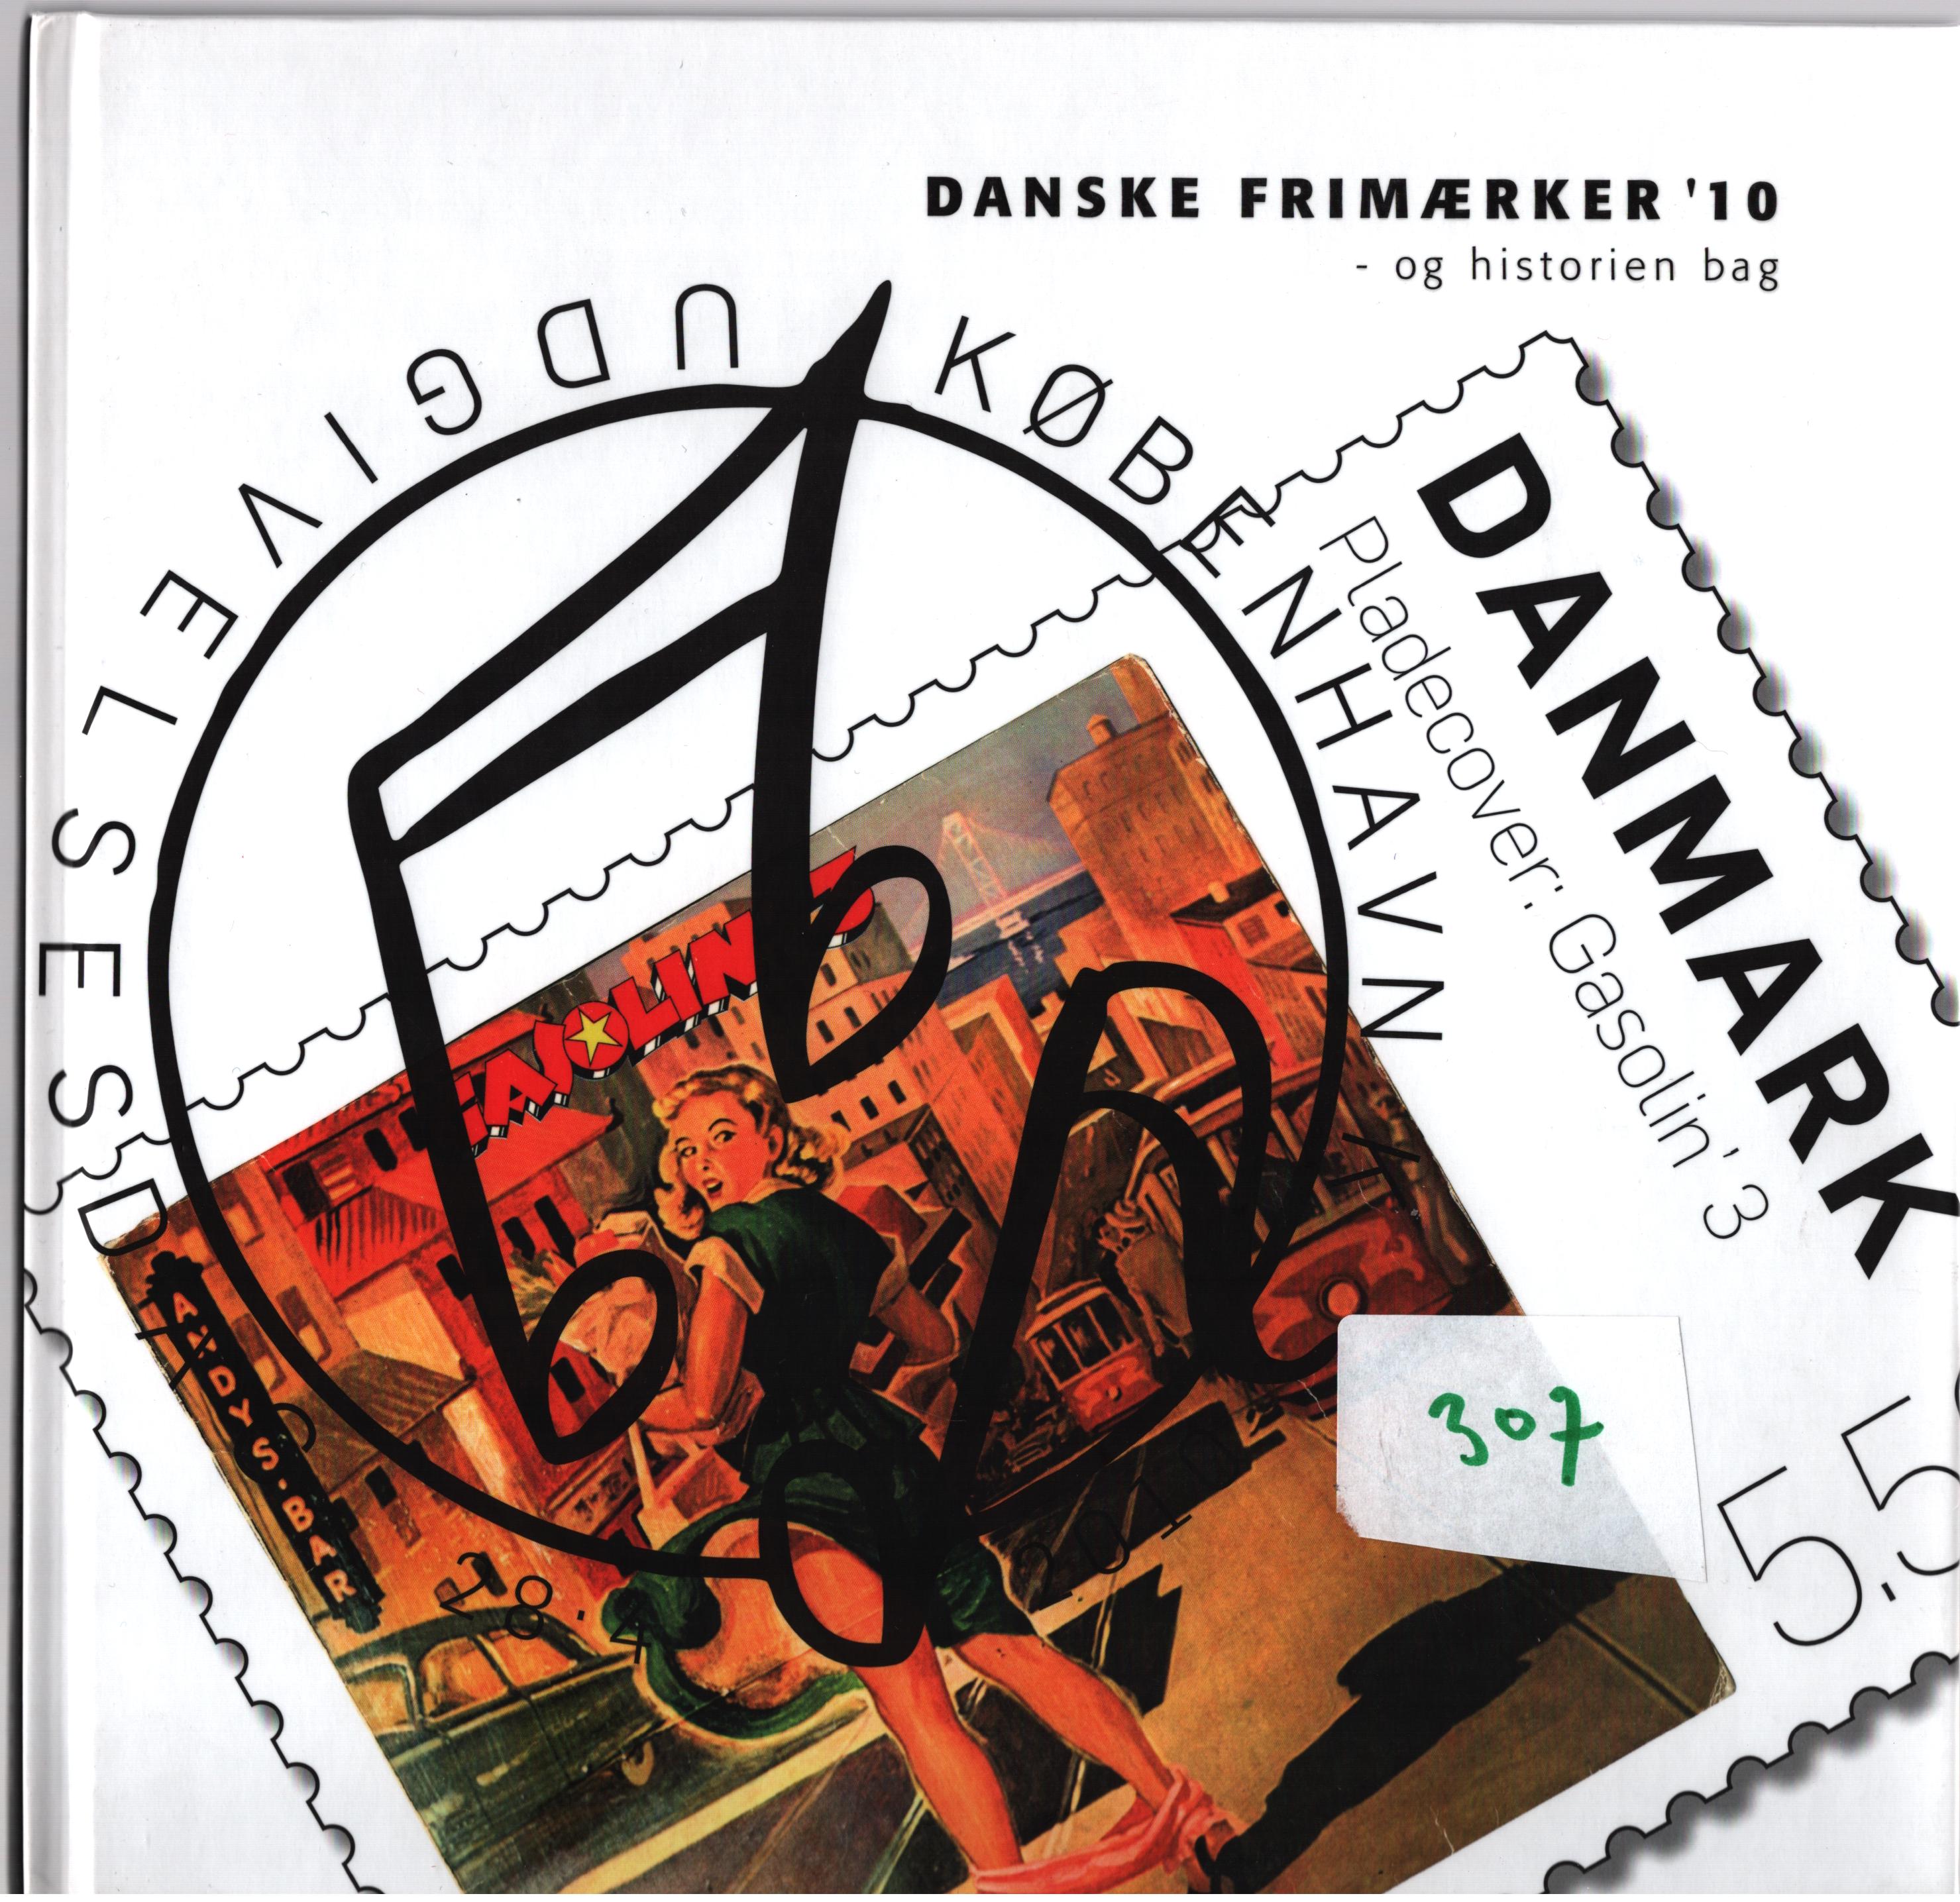 Danish 2010 stamp yearbook. Unmounted mint stamps. Good condition. We combine postage on multiple